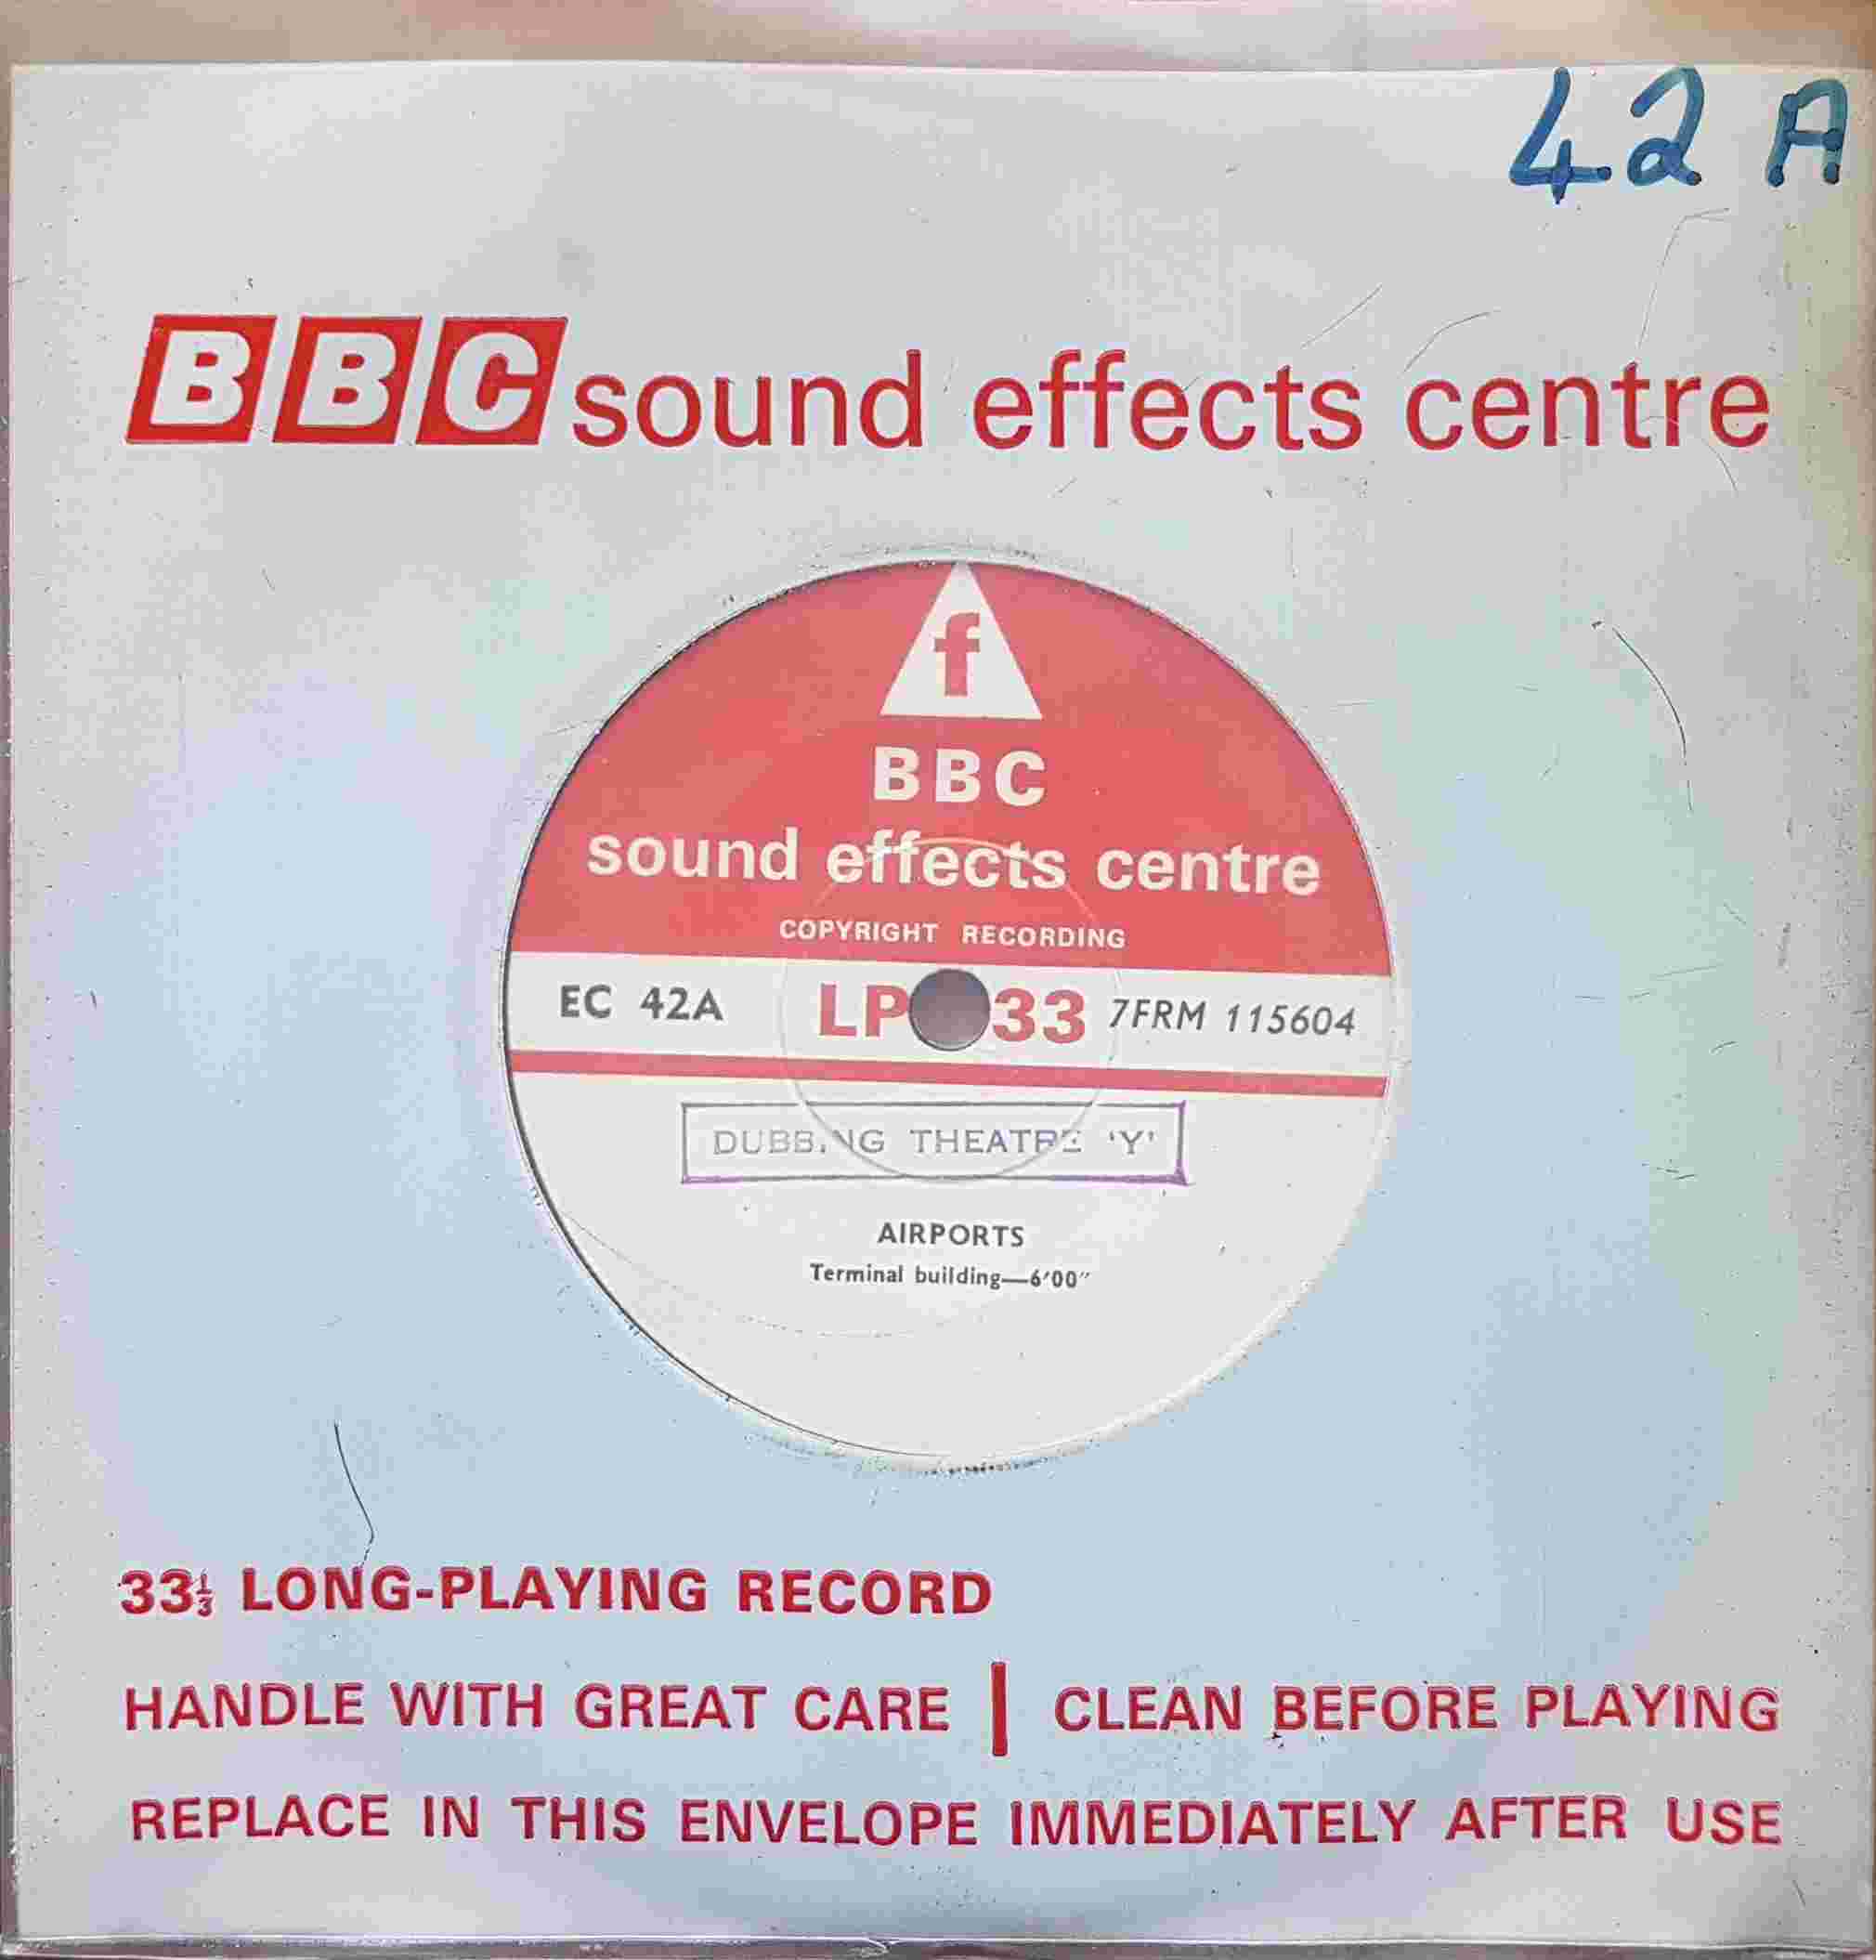 Picture of EC 42A Airports by artist Not registered from the BBC singles - Records and Tapes library